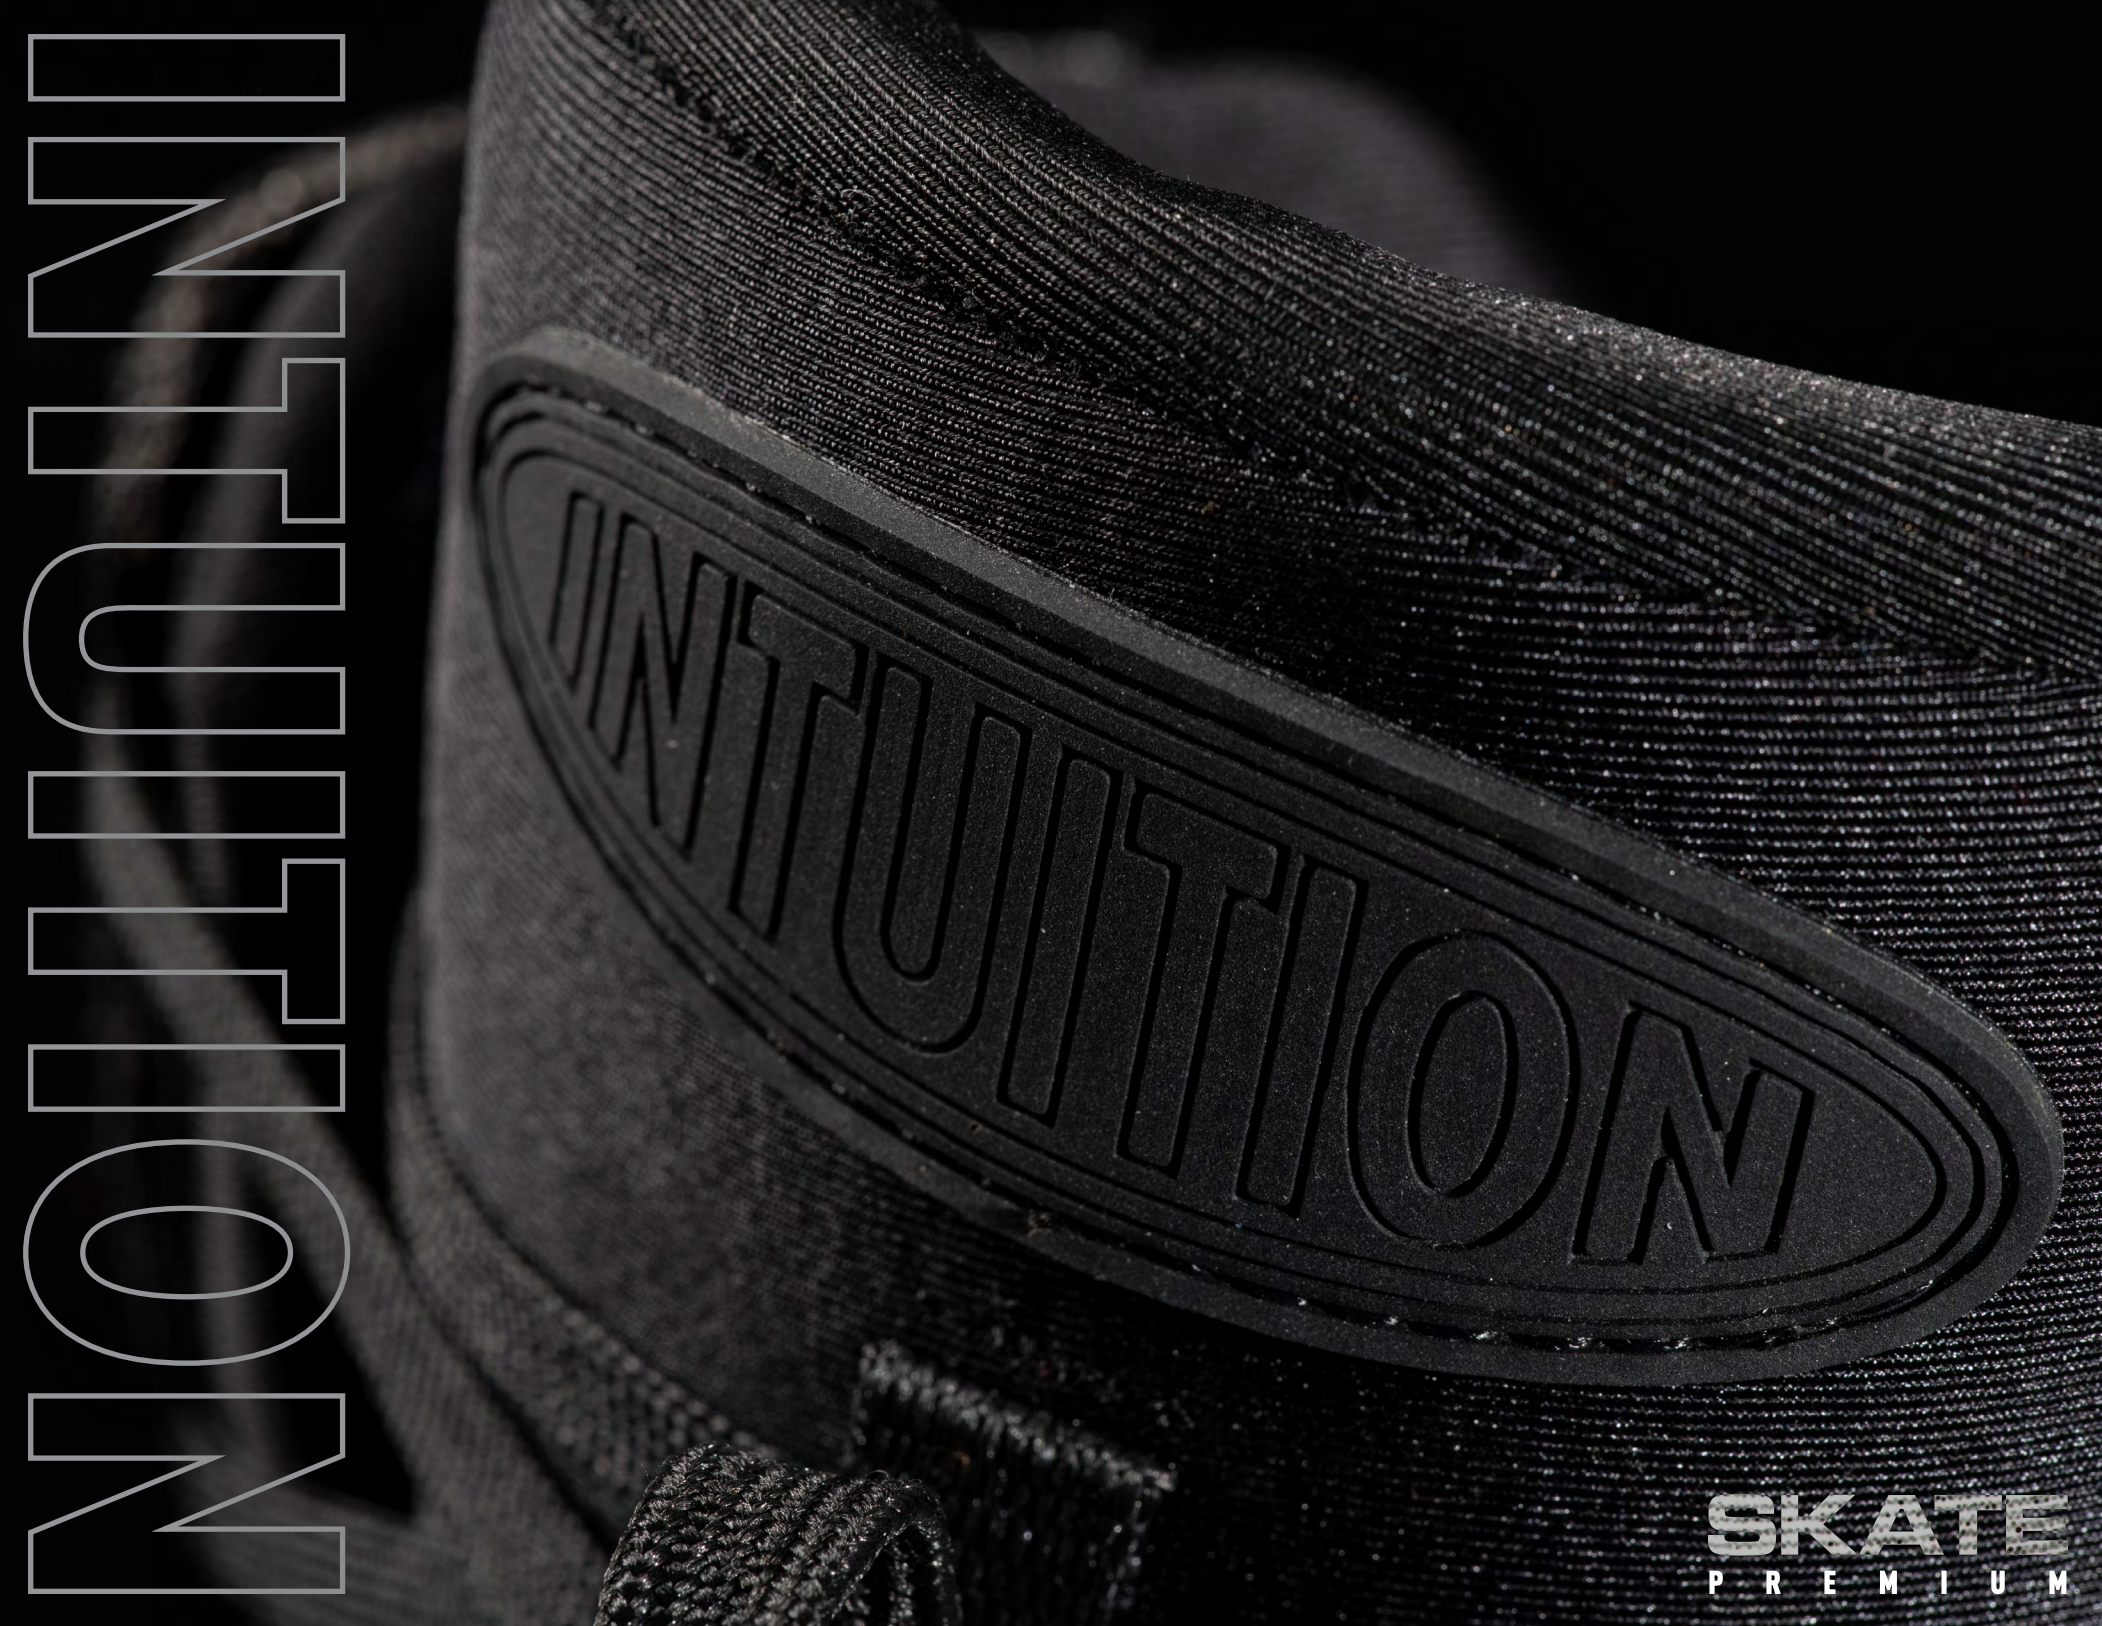 Intuition Skate Premium inline skate liners